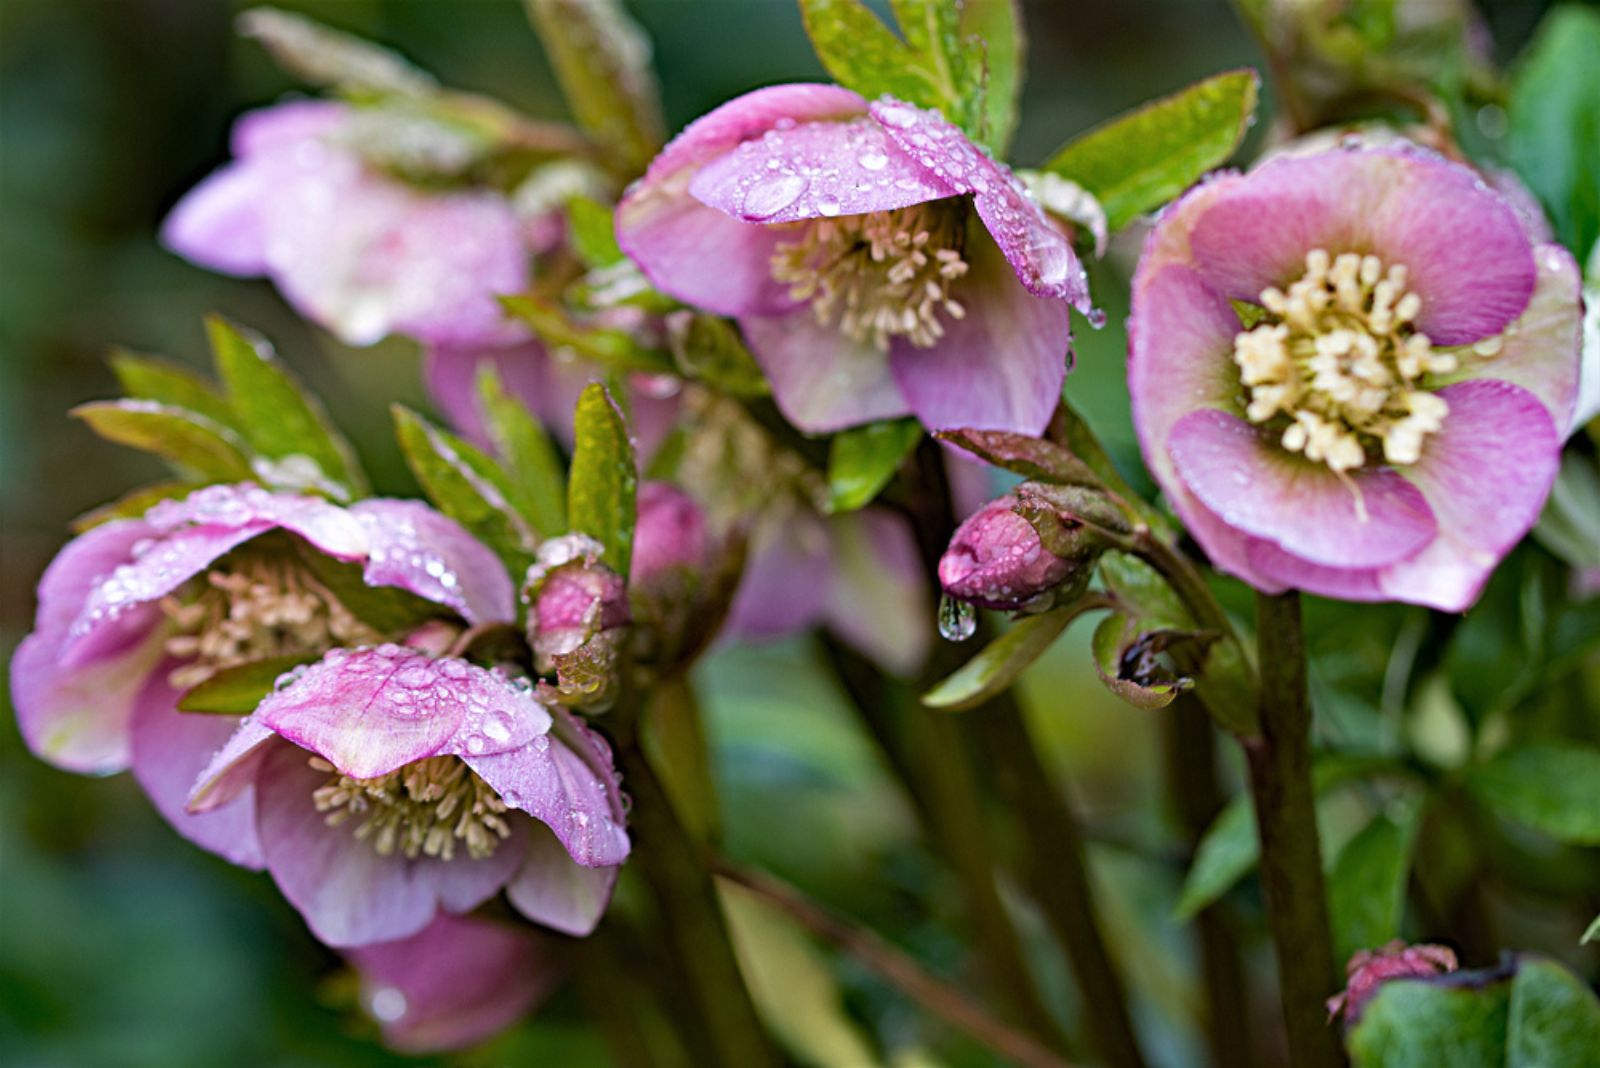 colourful freshness of winter flowering Hellebores